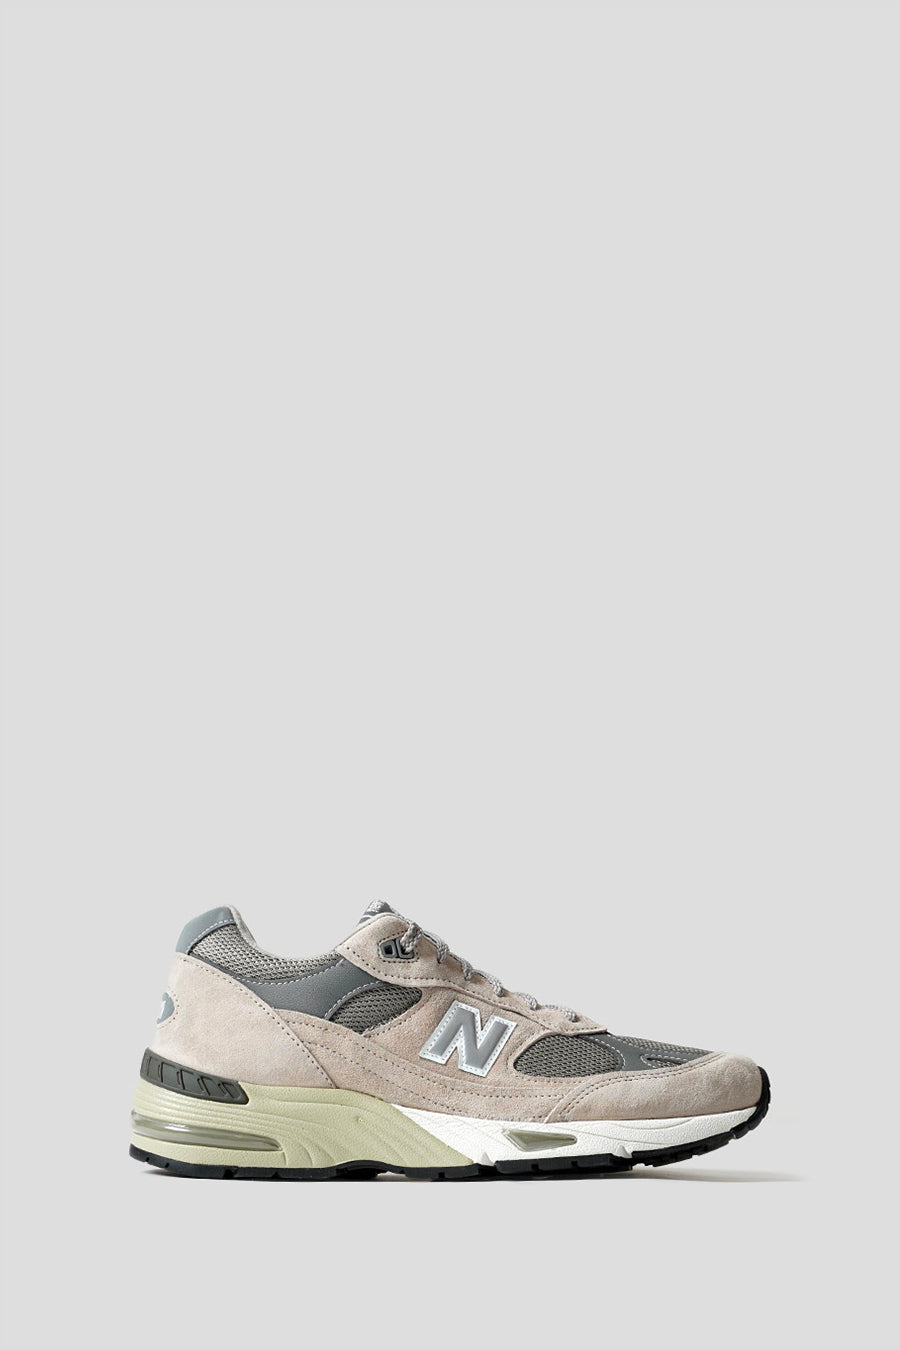 NEW BALANCE - SNEAKERS 991 MADE IN UK GREY ET WHITE - LE LABO STORE